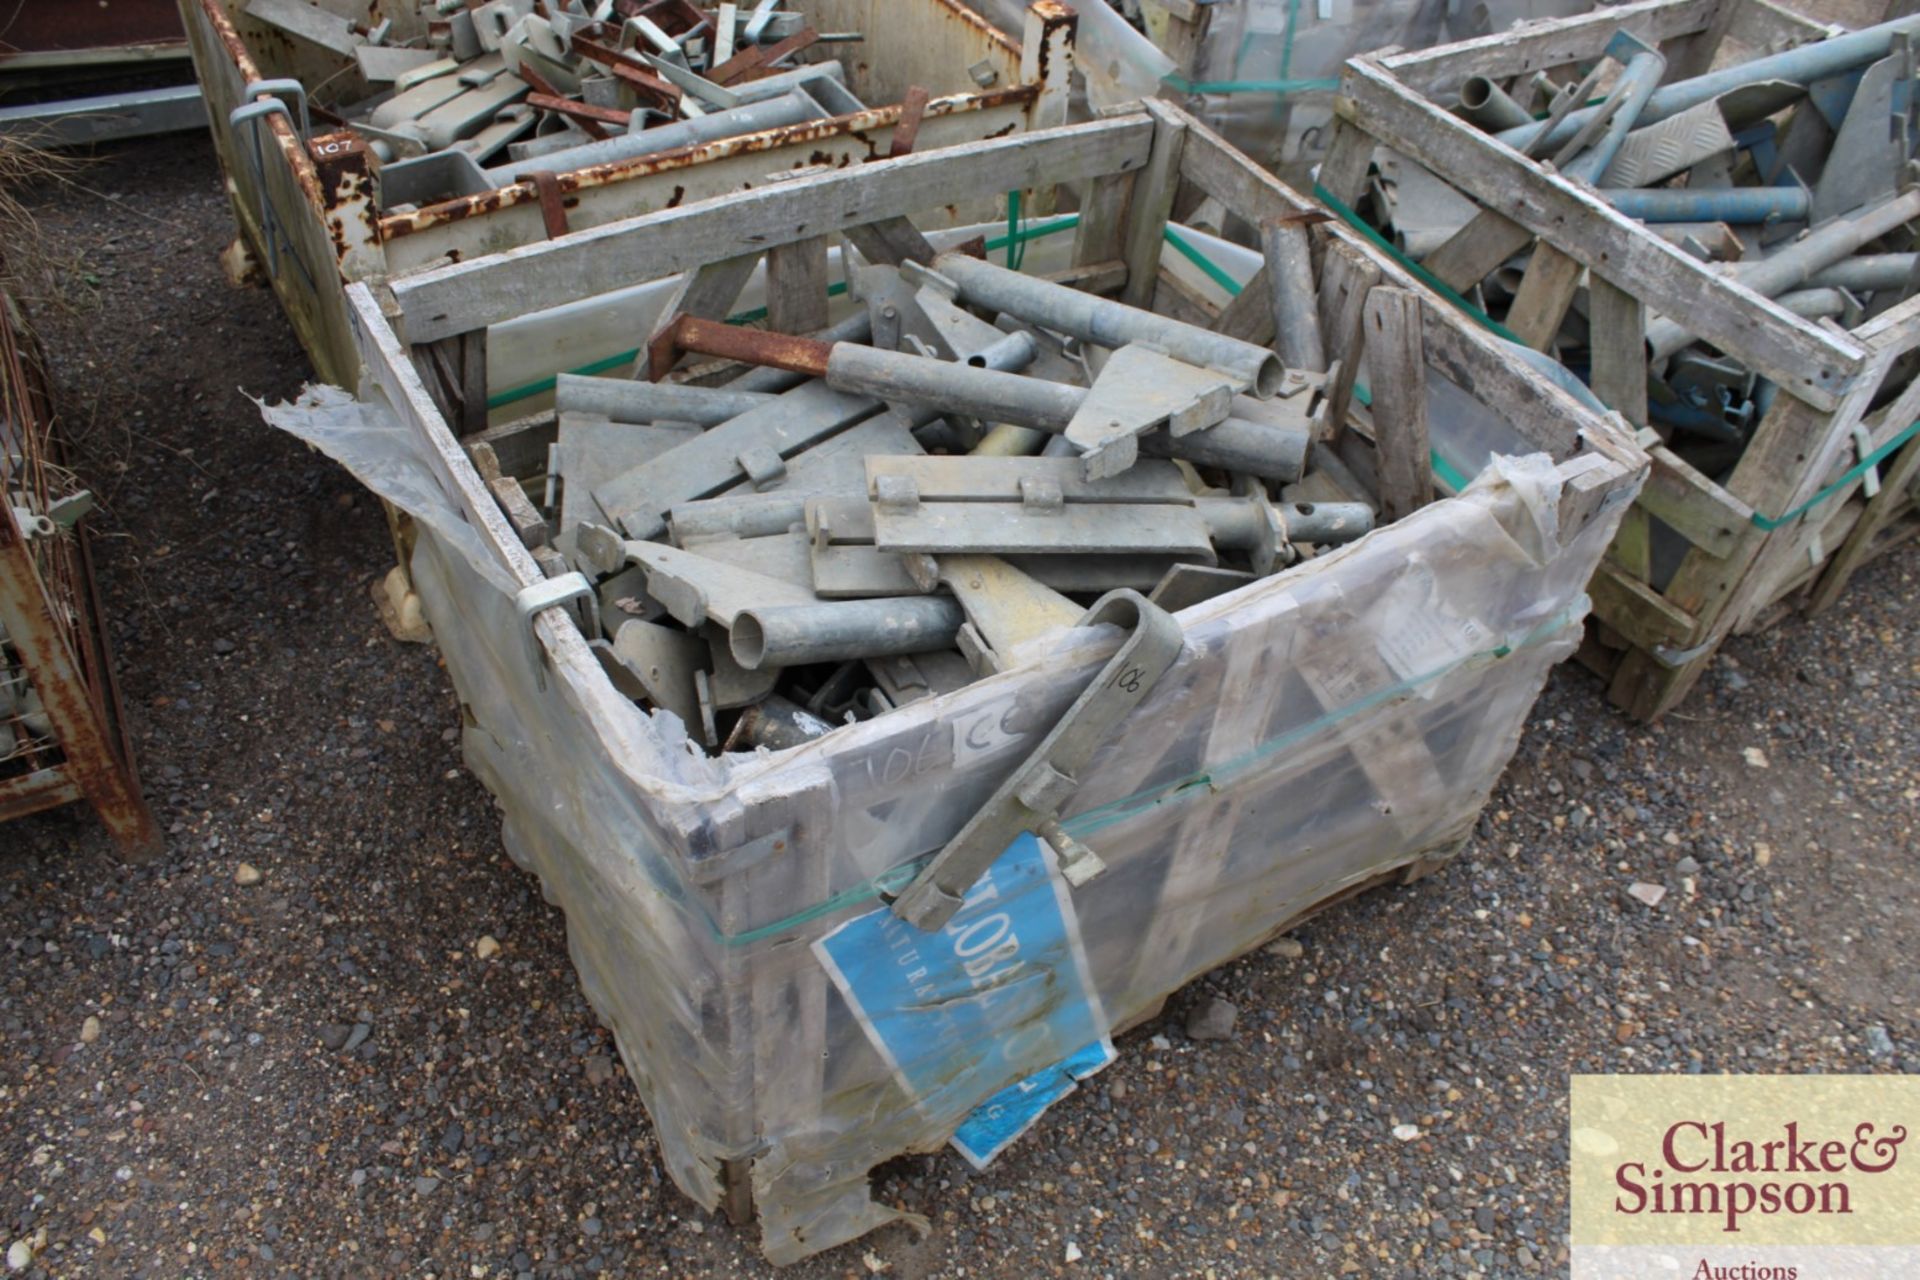 Stillage of Haki Scaffolding components. To include Adjustable Brackets, Brackets, Puncheon Units